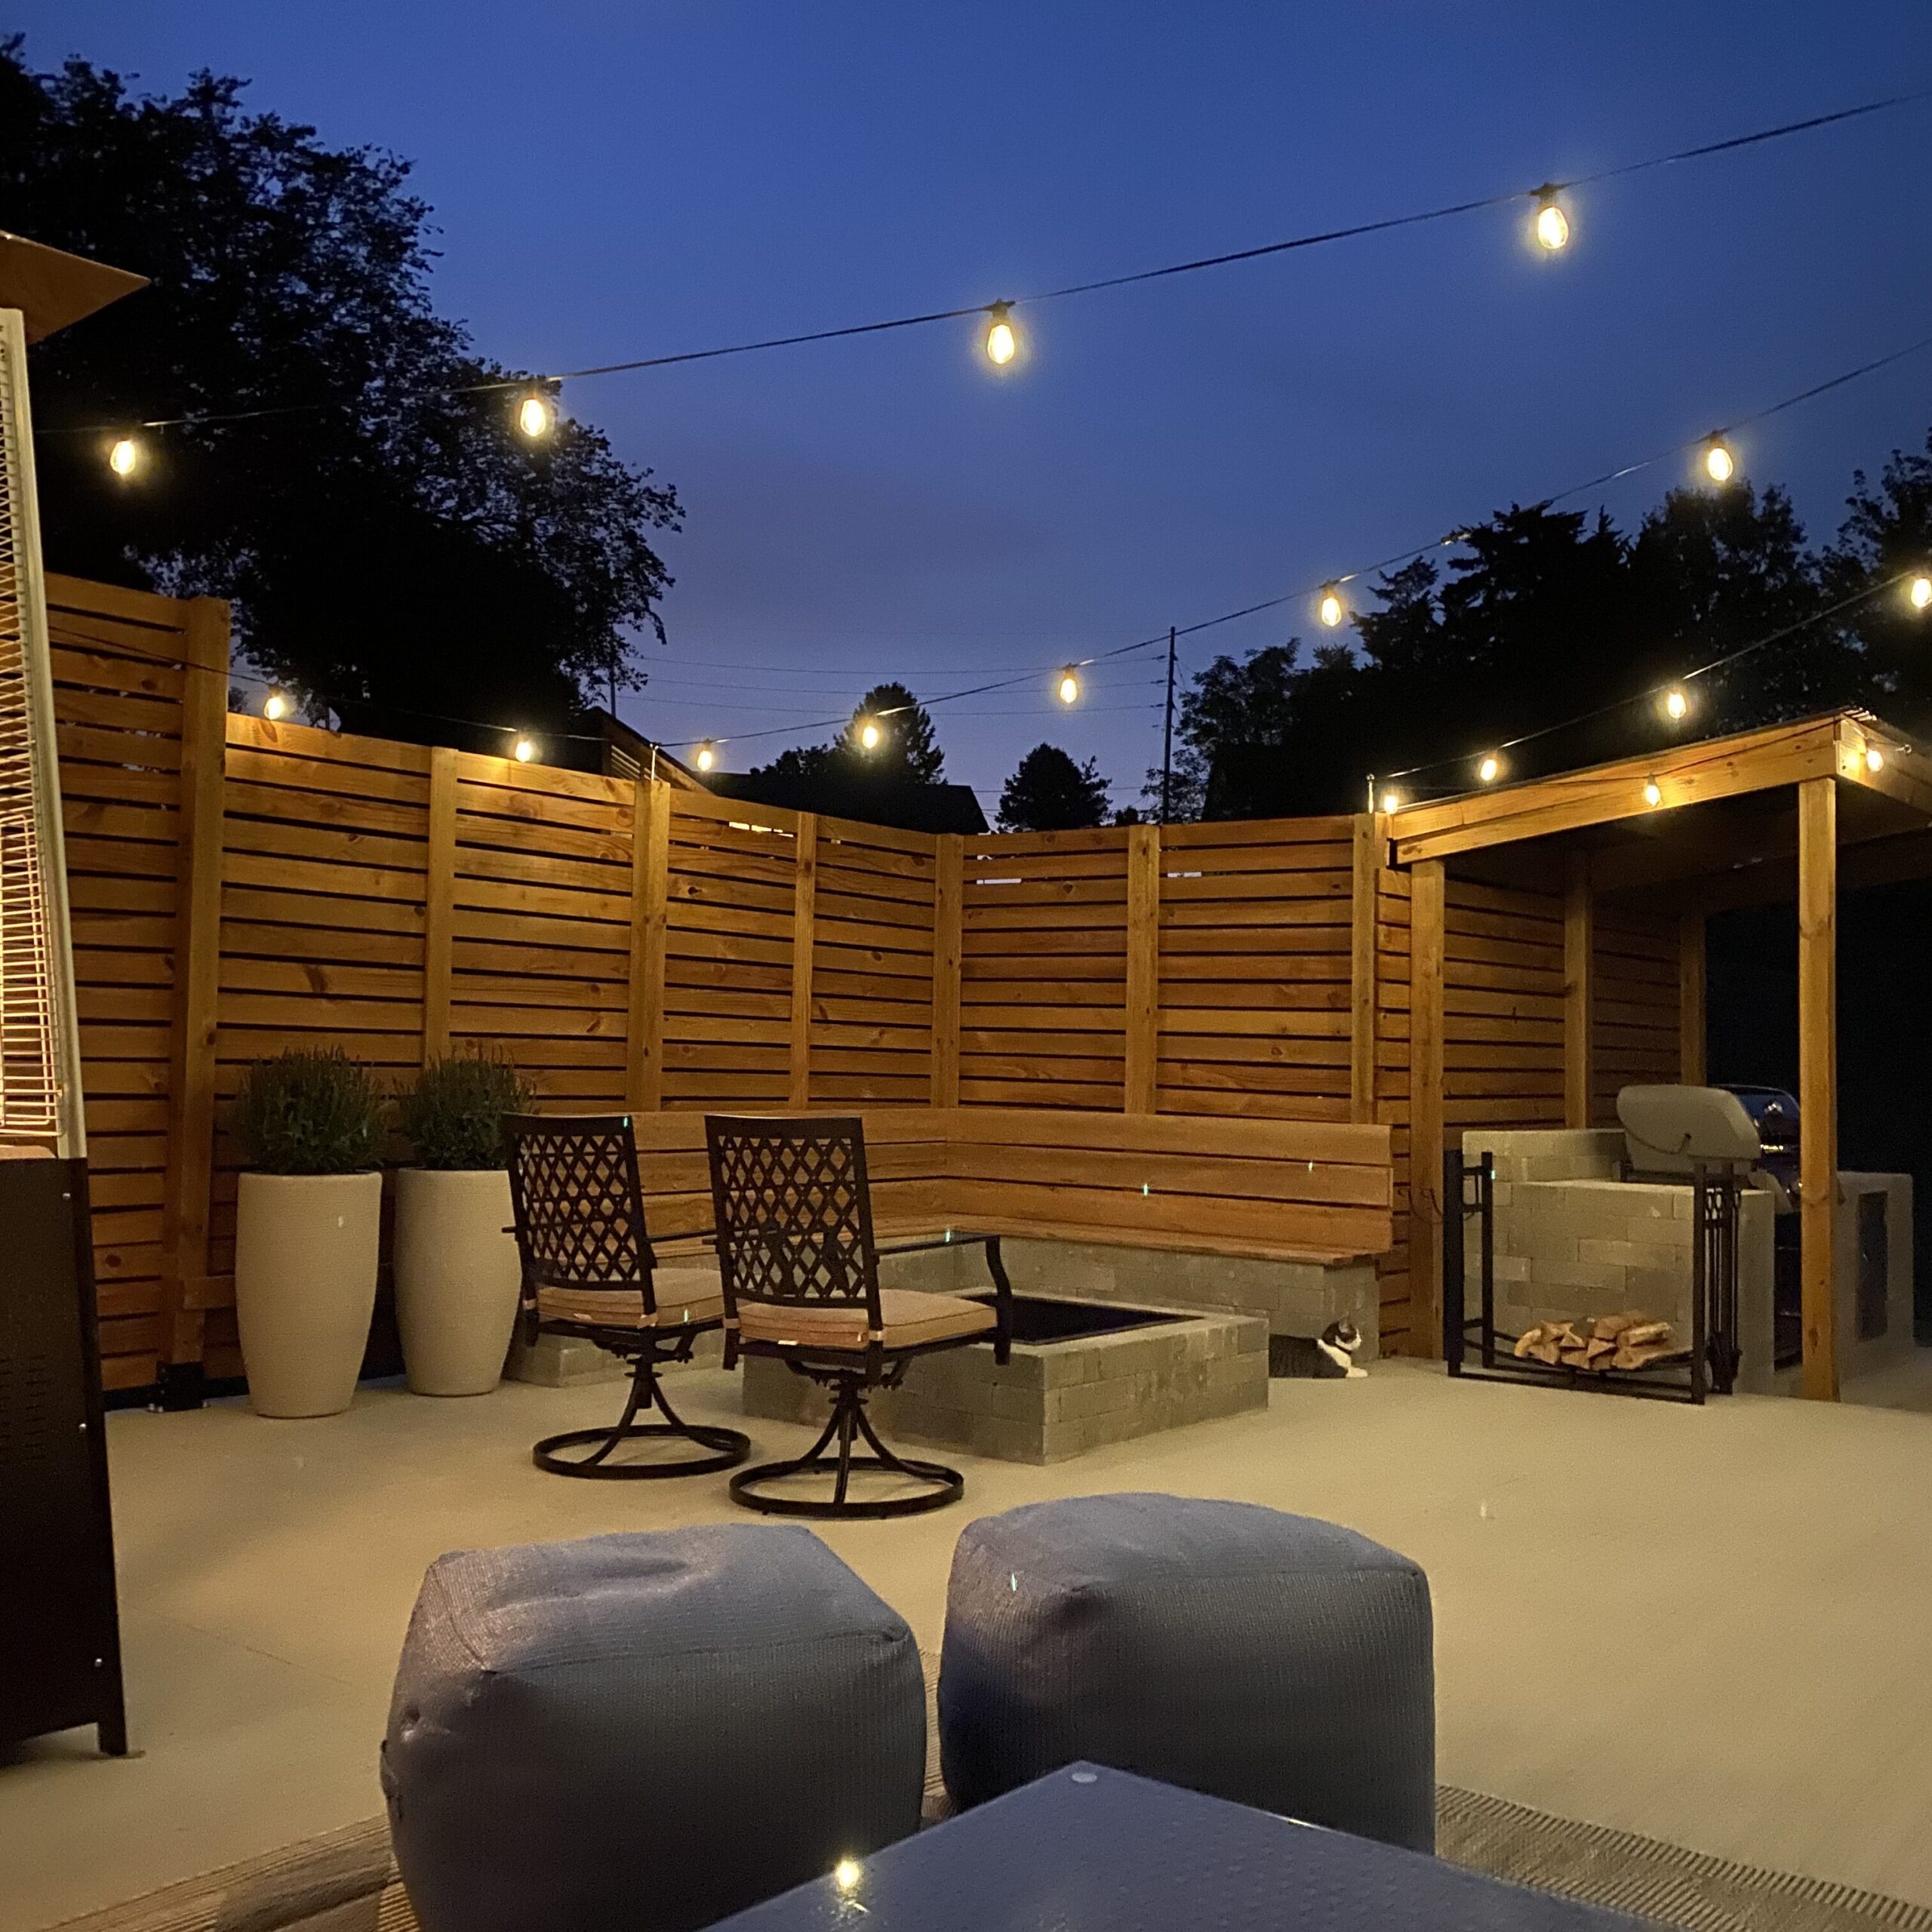 Furnished back patio with privacy fence